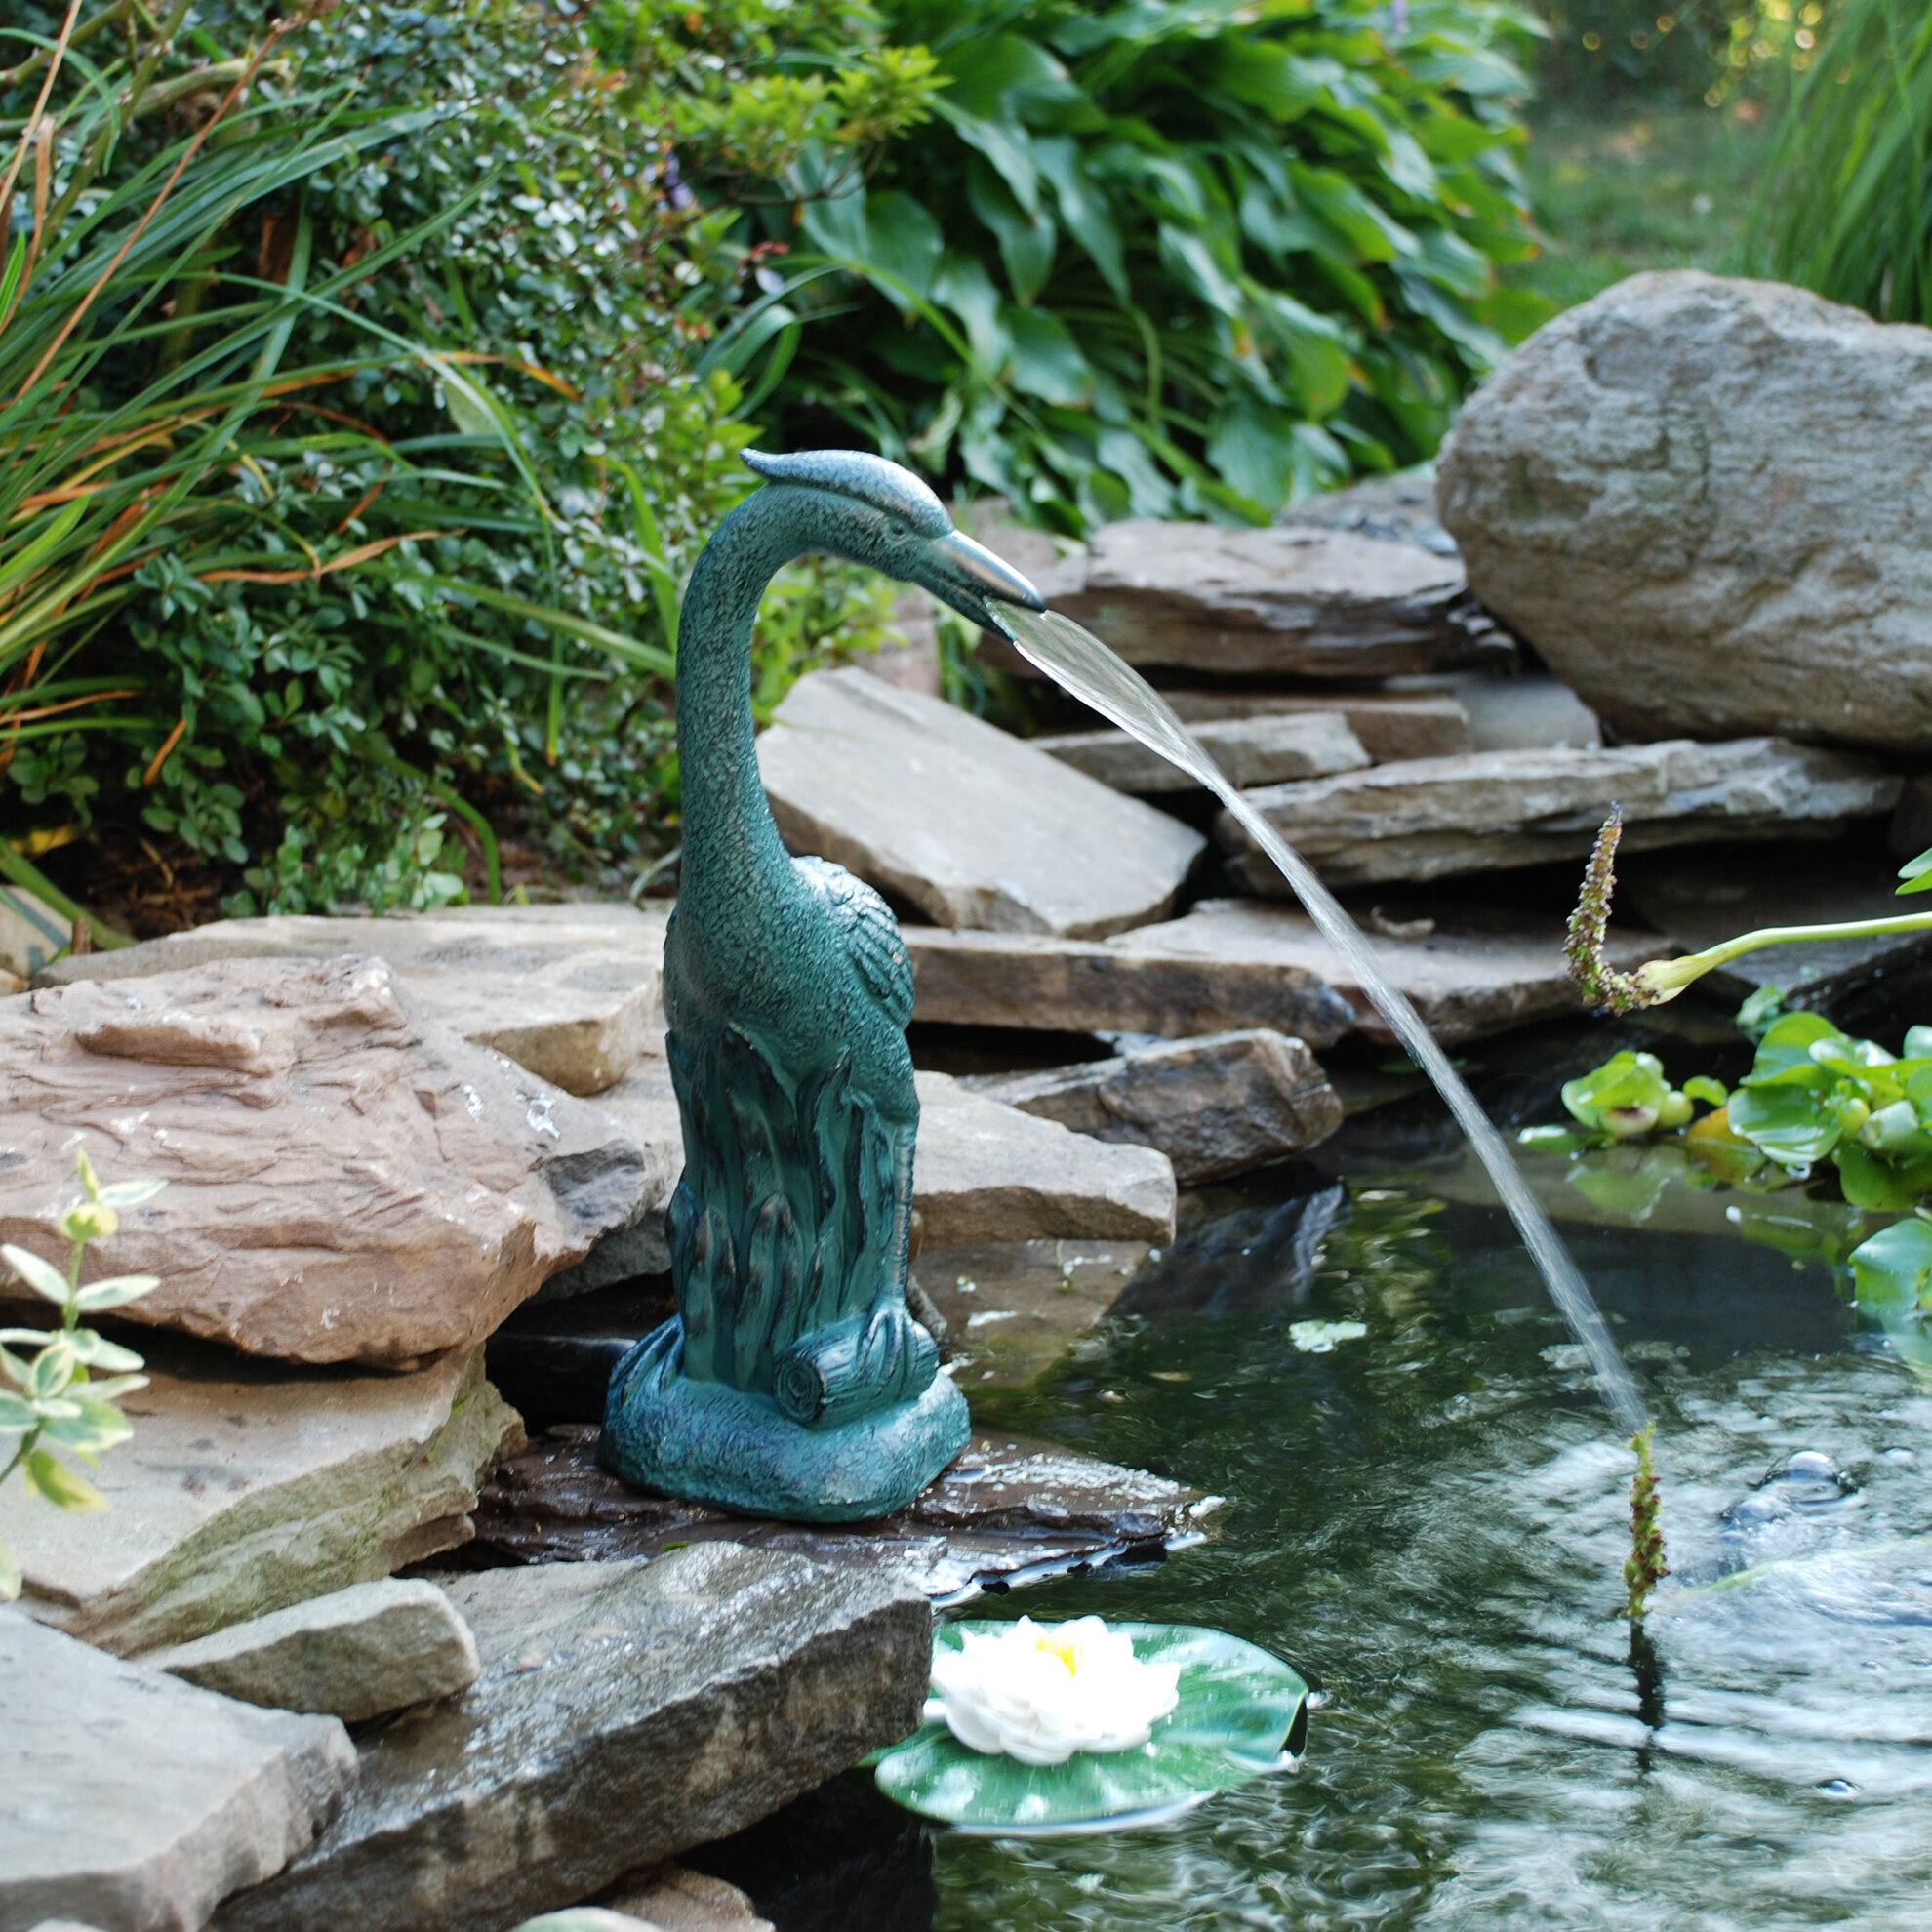 Details about   Danner Pondmaster Spouting Frog Pond Statue Fountain Spitter Part # 03765 